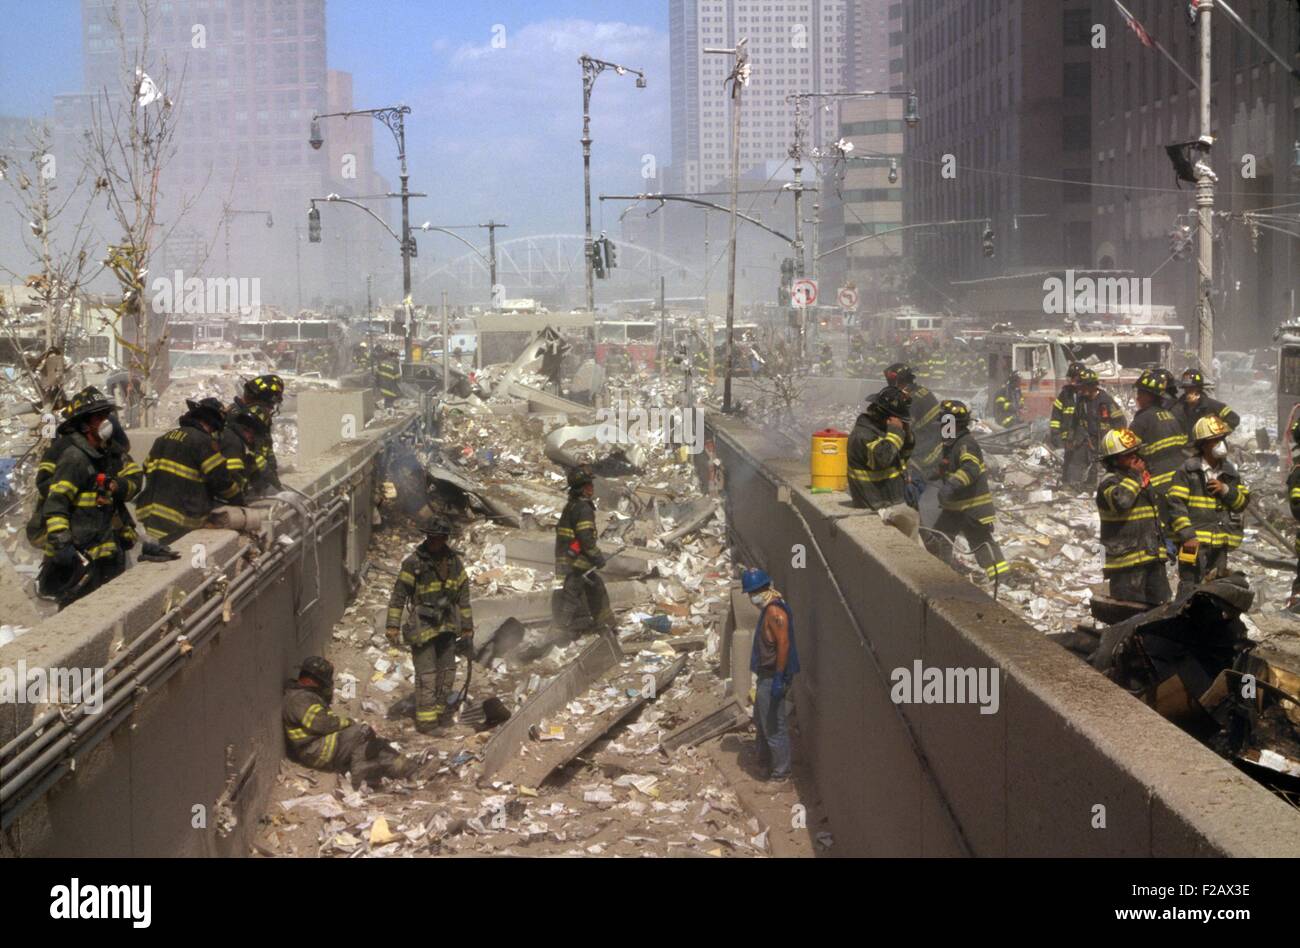 Fireman and other rescue workers on the northwest corner of the World Trade Center site. The view is to the north, up the West Side Highway (West Street) shortly after the collapse of both Twin Towers. Some men are seated, while others leaning and adjusting facemasks. Many vehicles were damaged by falling debris. (BSLOC_2015_2_57) Stock Photo